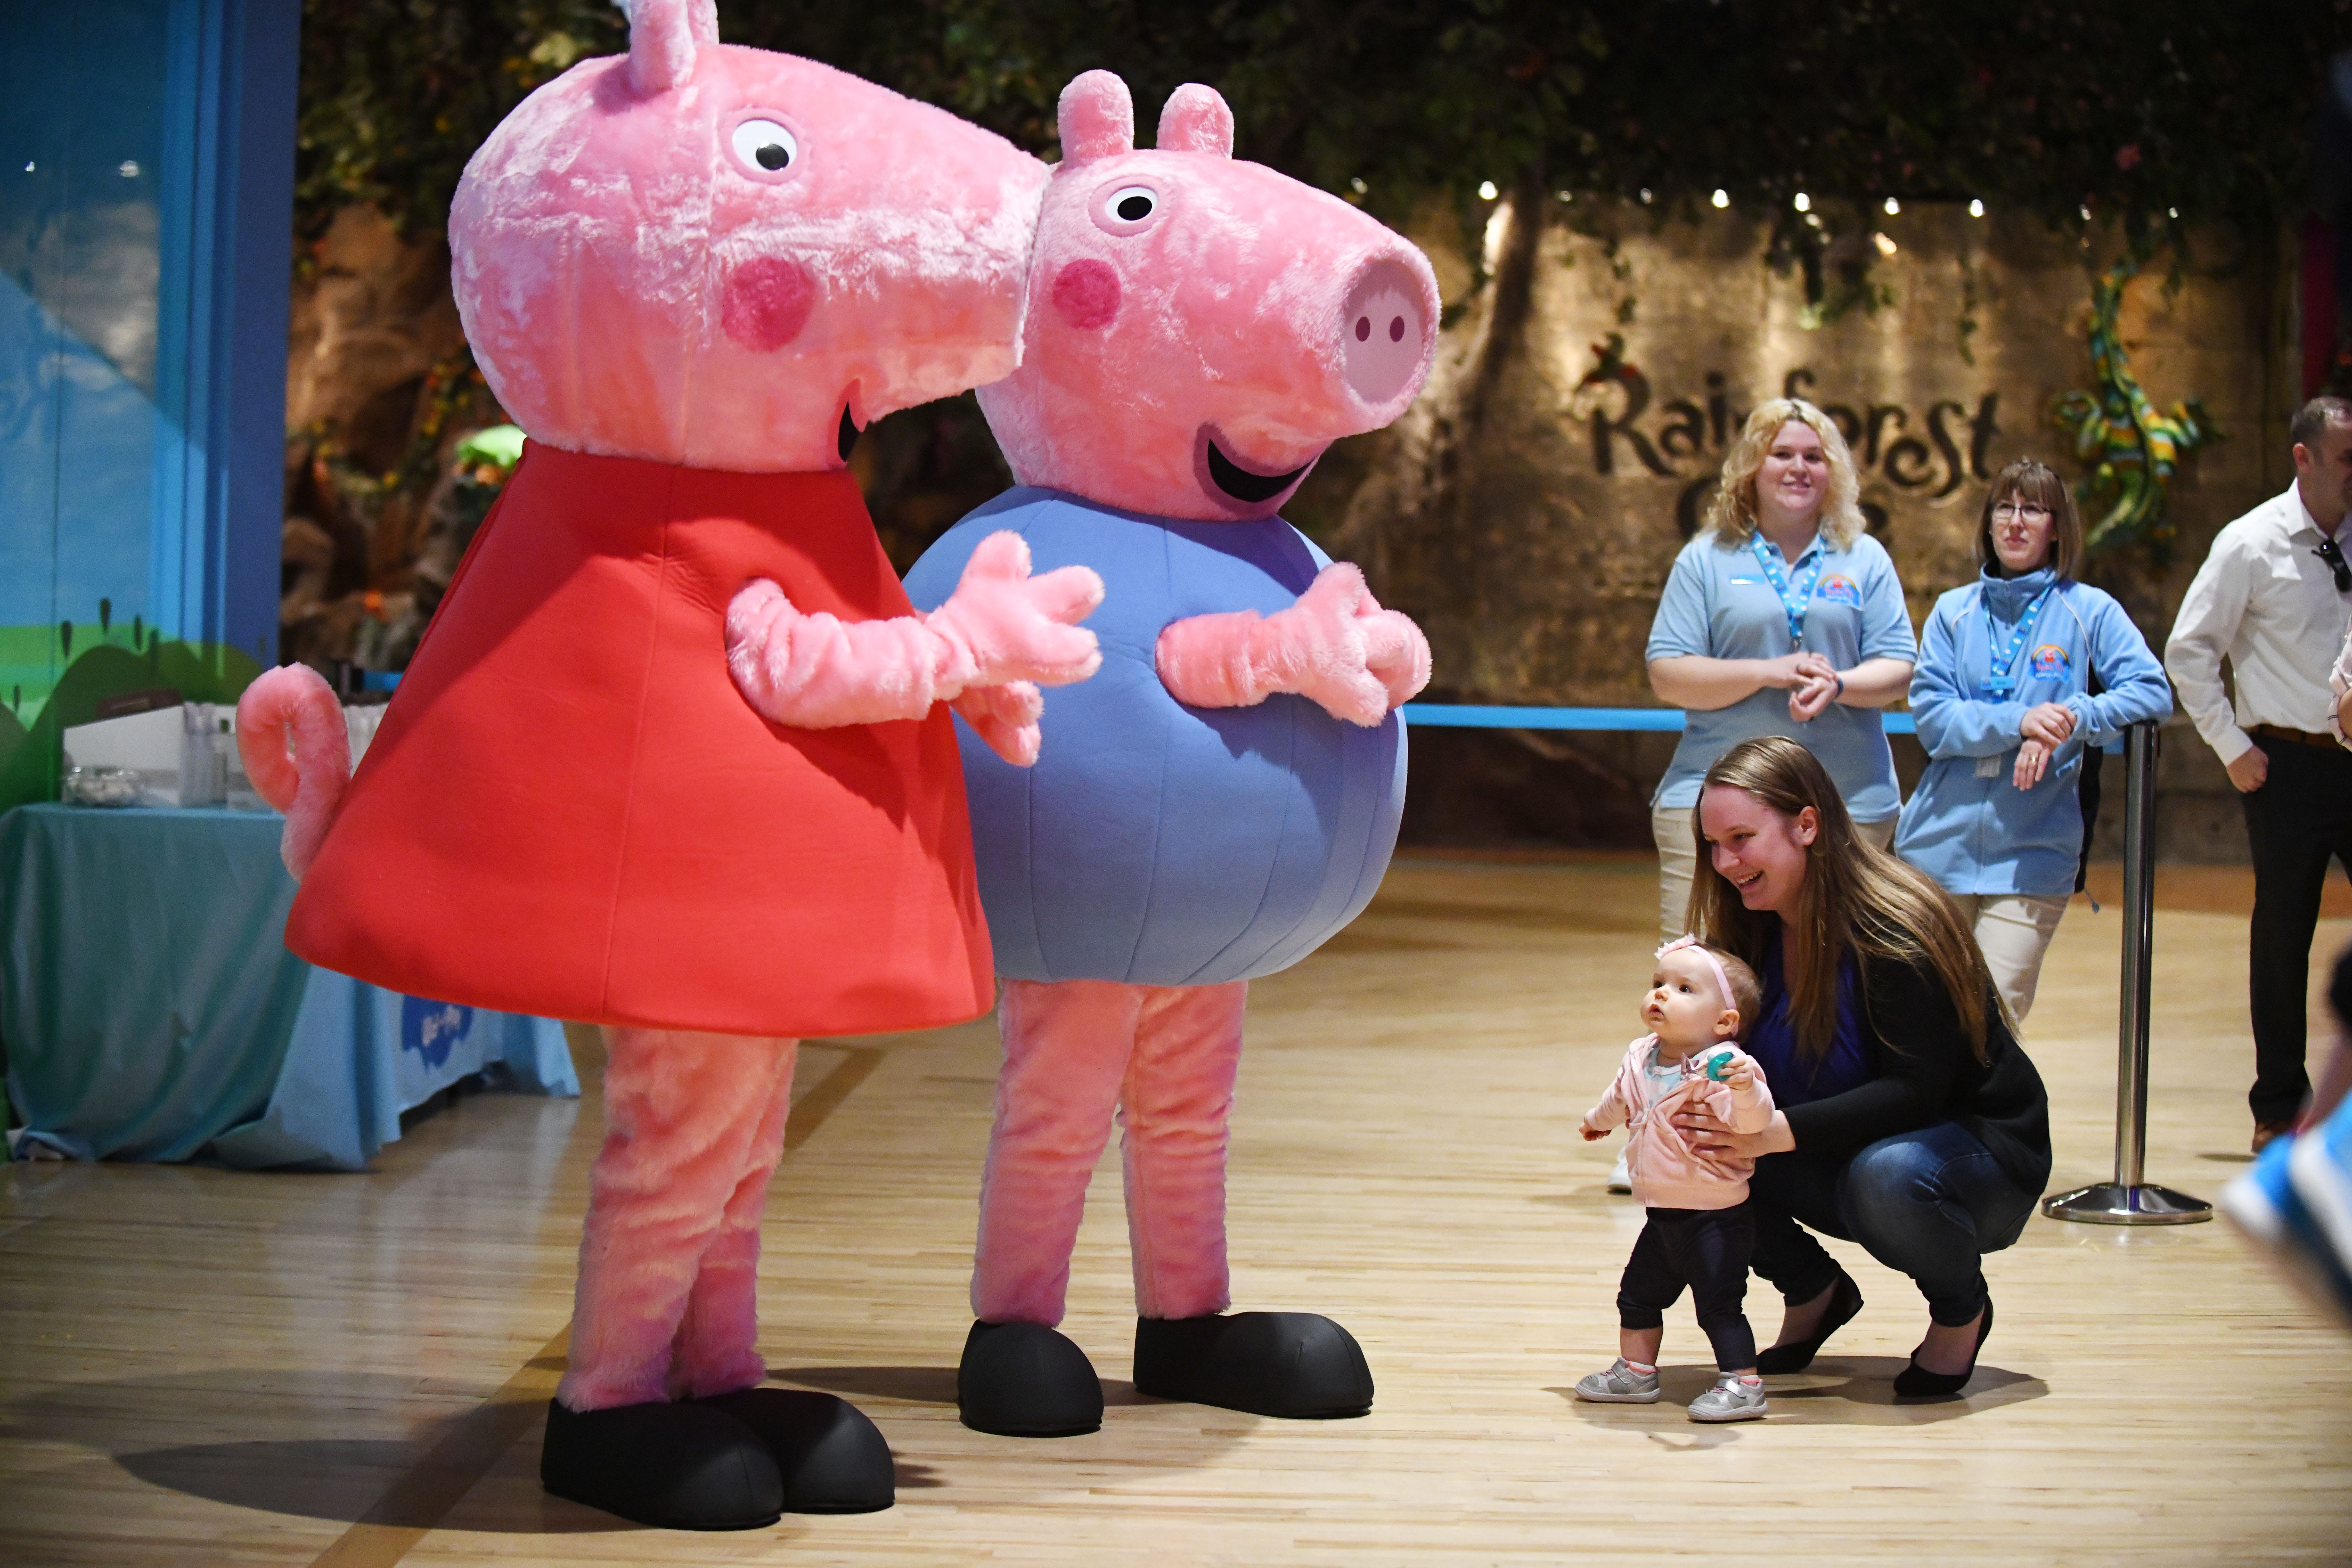 Christina Schafer with daughter Athena Schafer, 10 months, meet Peppa and George during the grand opening of the Peppa Pig World of Play on Tuesday at Great Lakes Crossing.